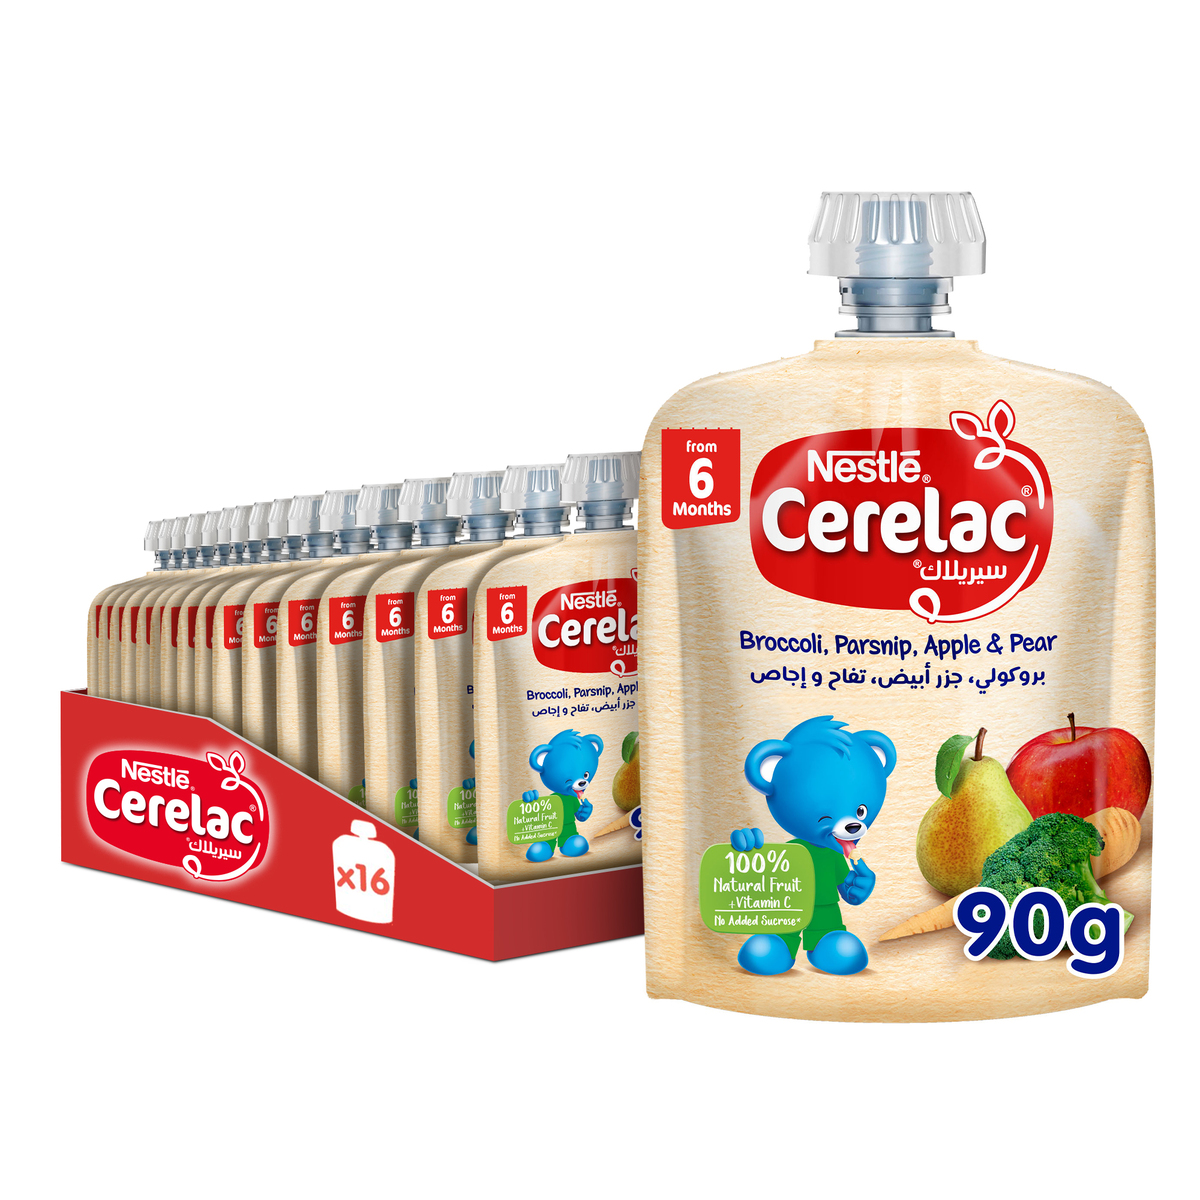 Nestle Cerelac Fruits & Vegetables Puree Pouch Broccoli, Parsnip, Apple & Pear From 6 Months 90 g